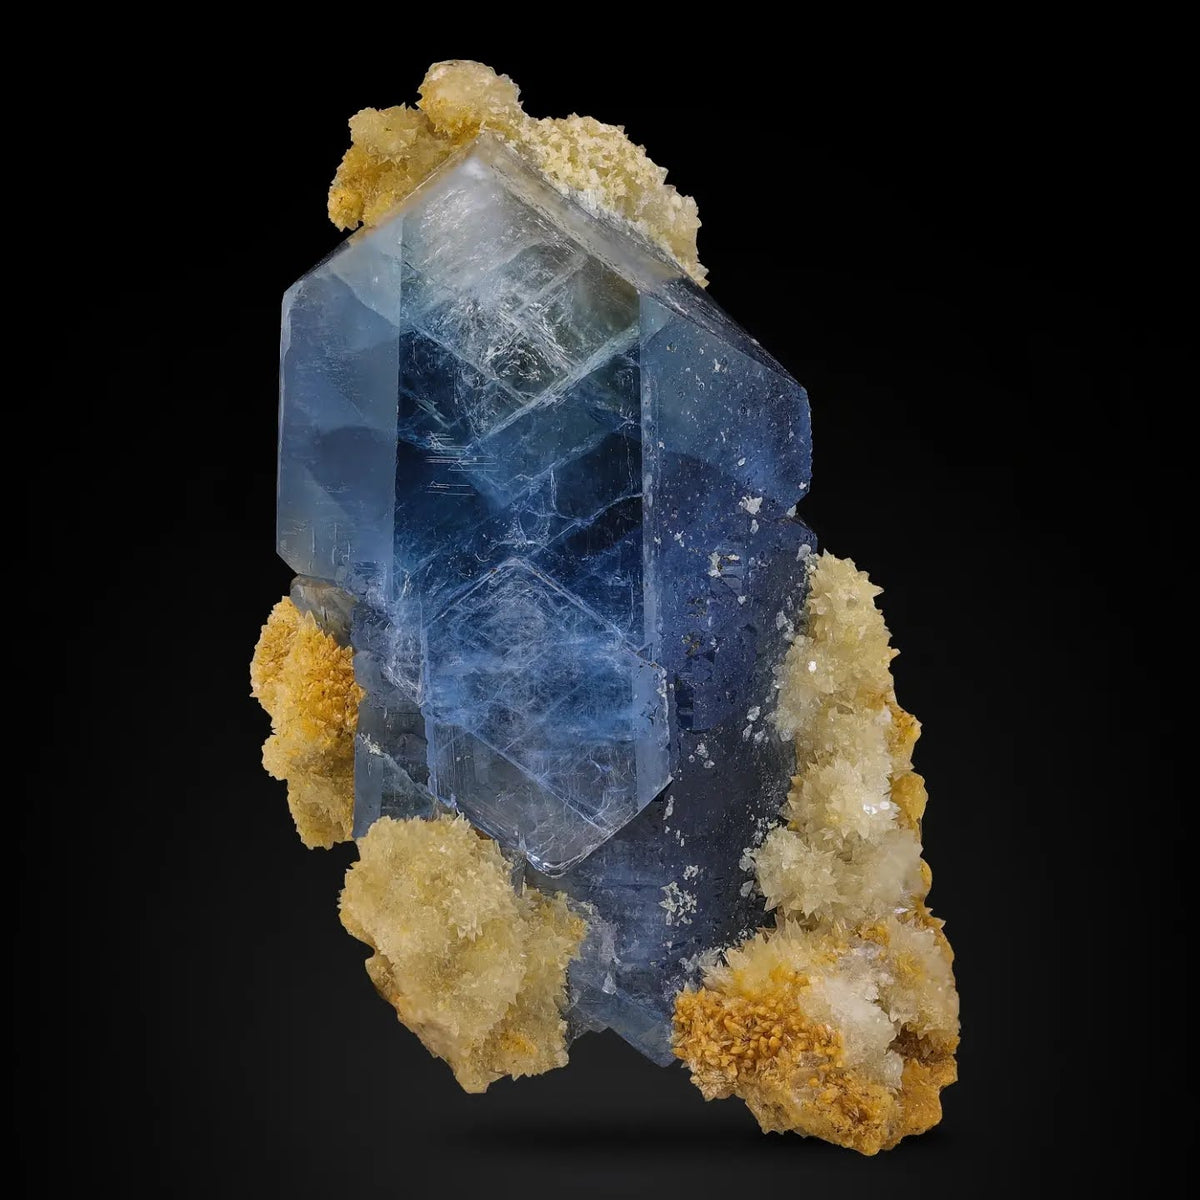 attractive new find of vibrant blue Celestite with Calcite from Afghanistan